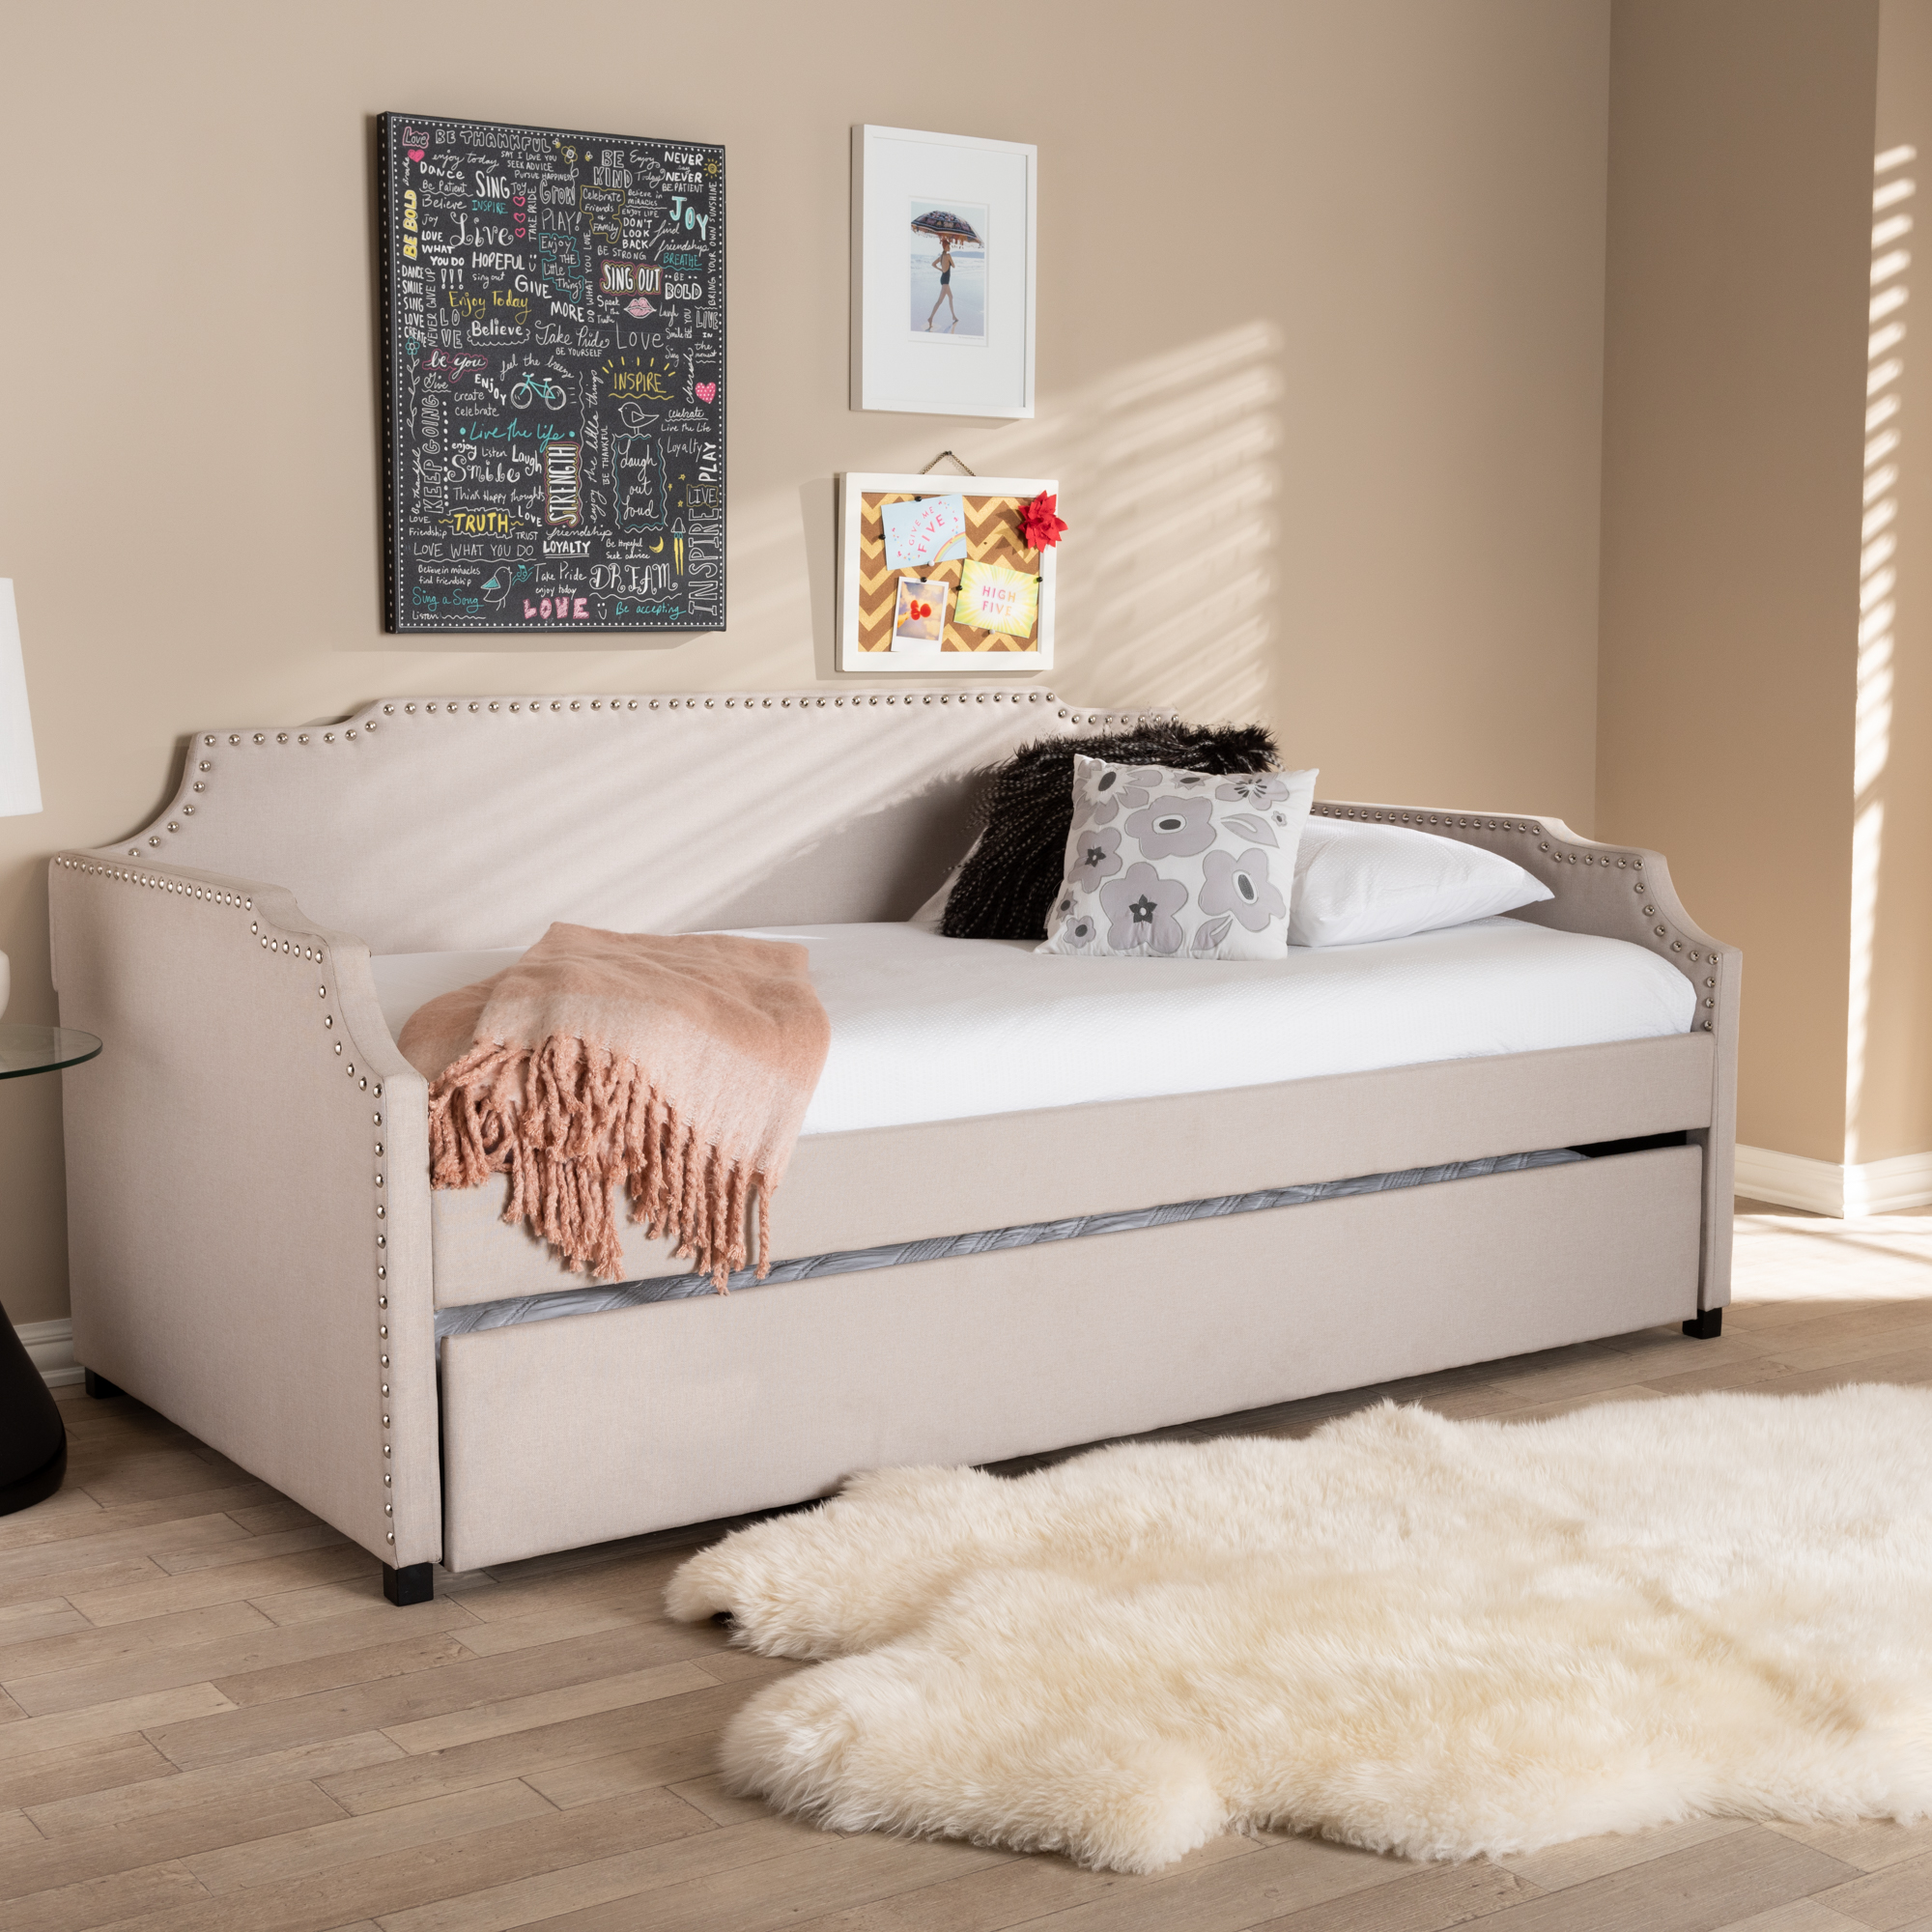 Contemporary Design Daybeds By Ally, Twin Size Guest Bed